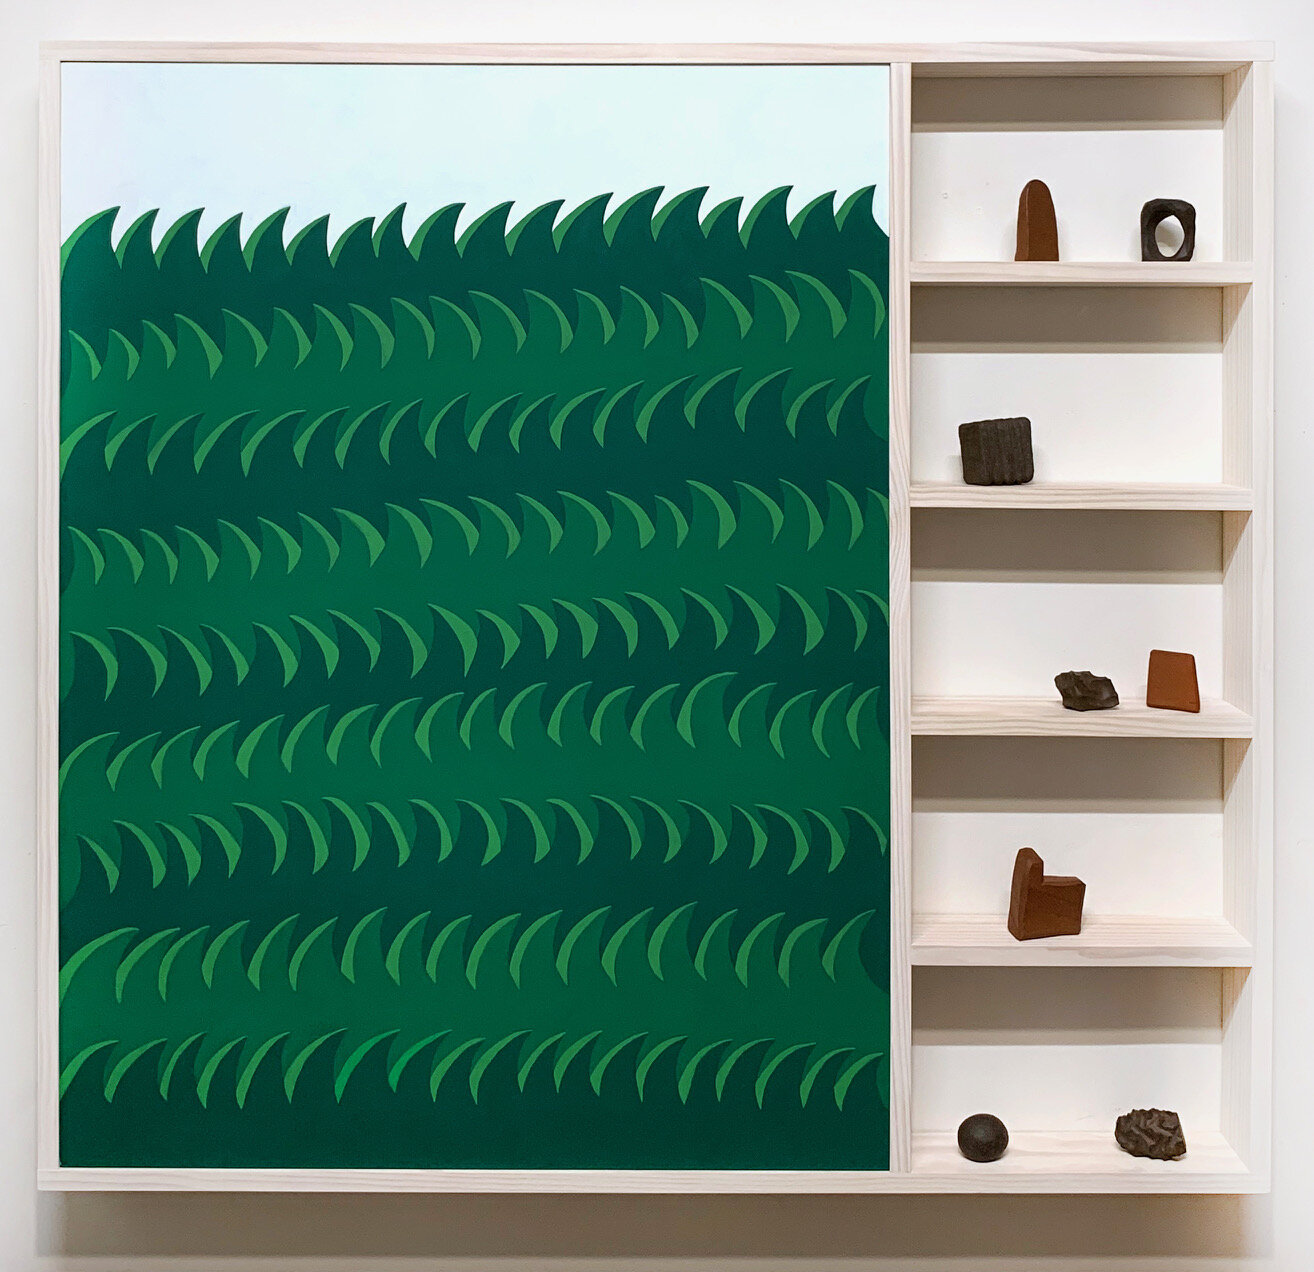   Turf &amp; Tokens , 2020  41.5 x 44 x 3.5 inches  Flashe on panel, pine, ceramic, and varnish 